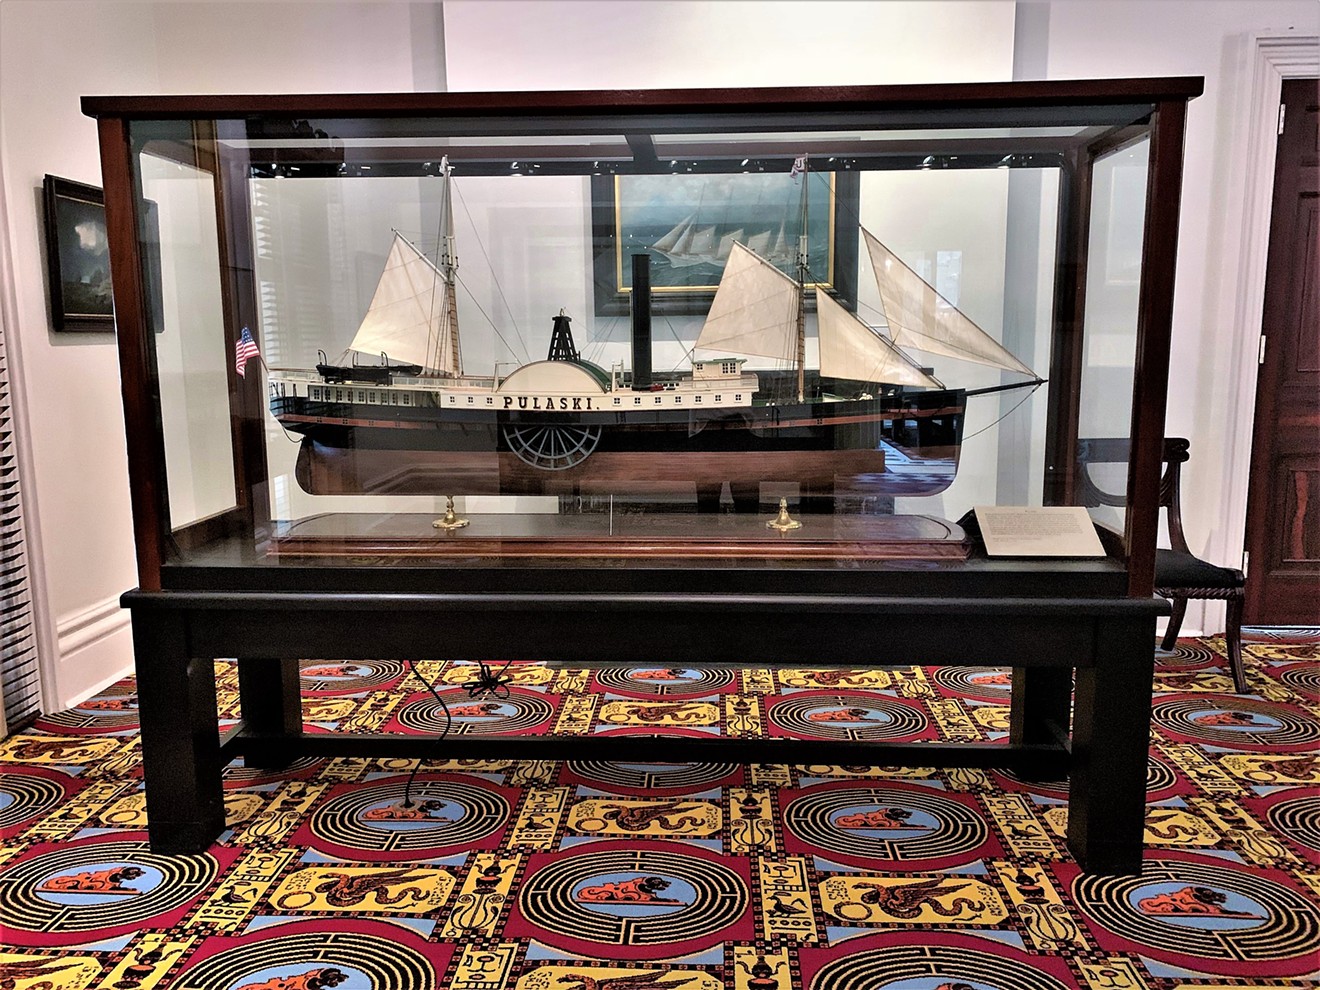 The S.S. Pulaski model on display at the Ships of the Sea Maritime Musuem